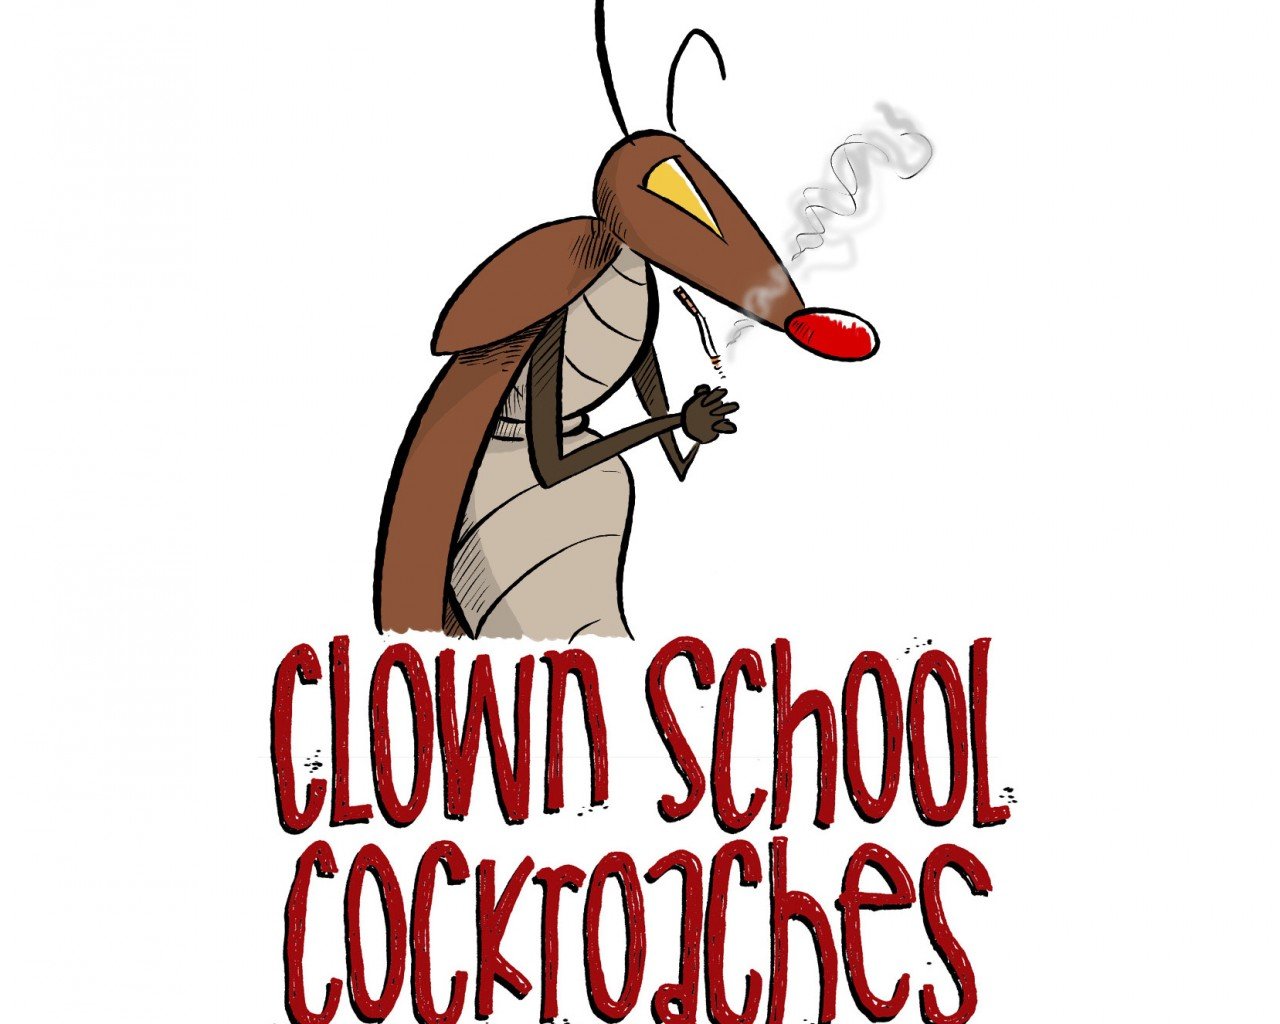 Poster Image for Clown School Cockroaches